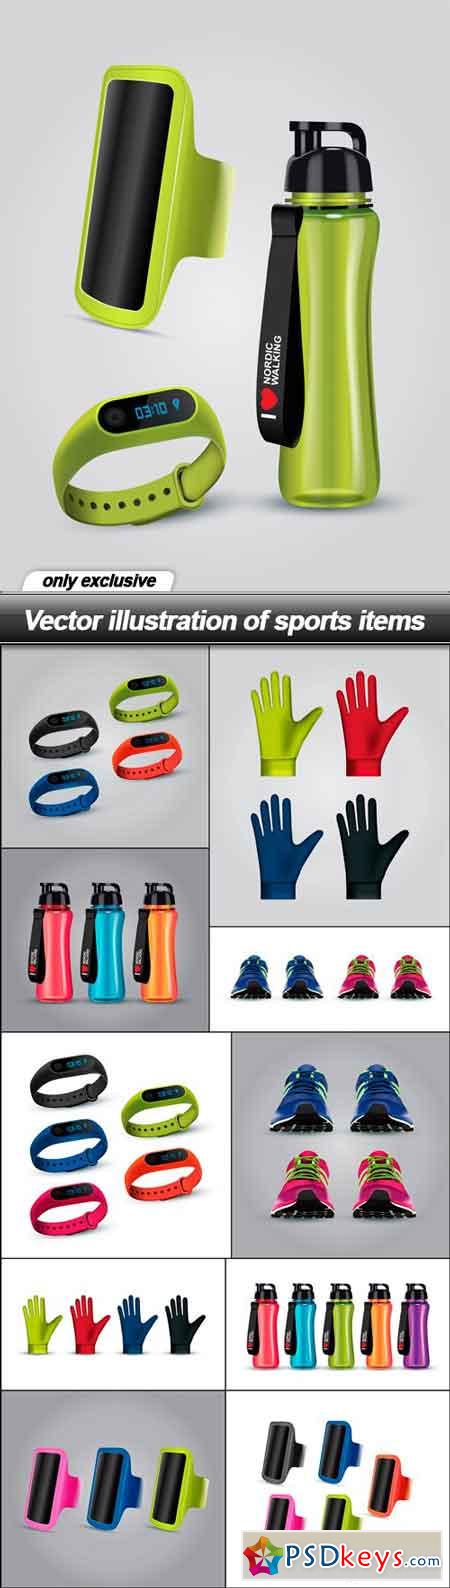 Vector illustration of sports items - 11 EPS